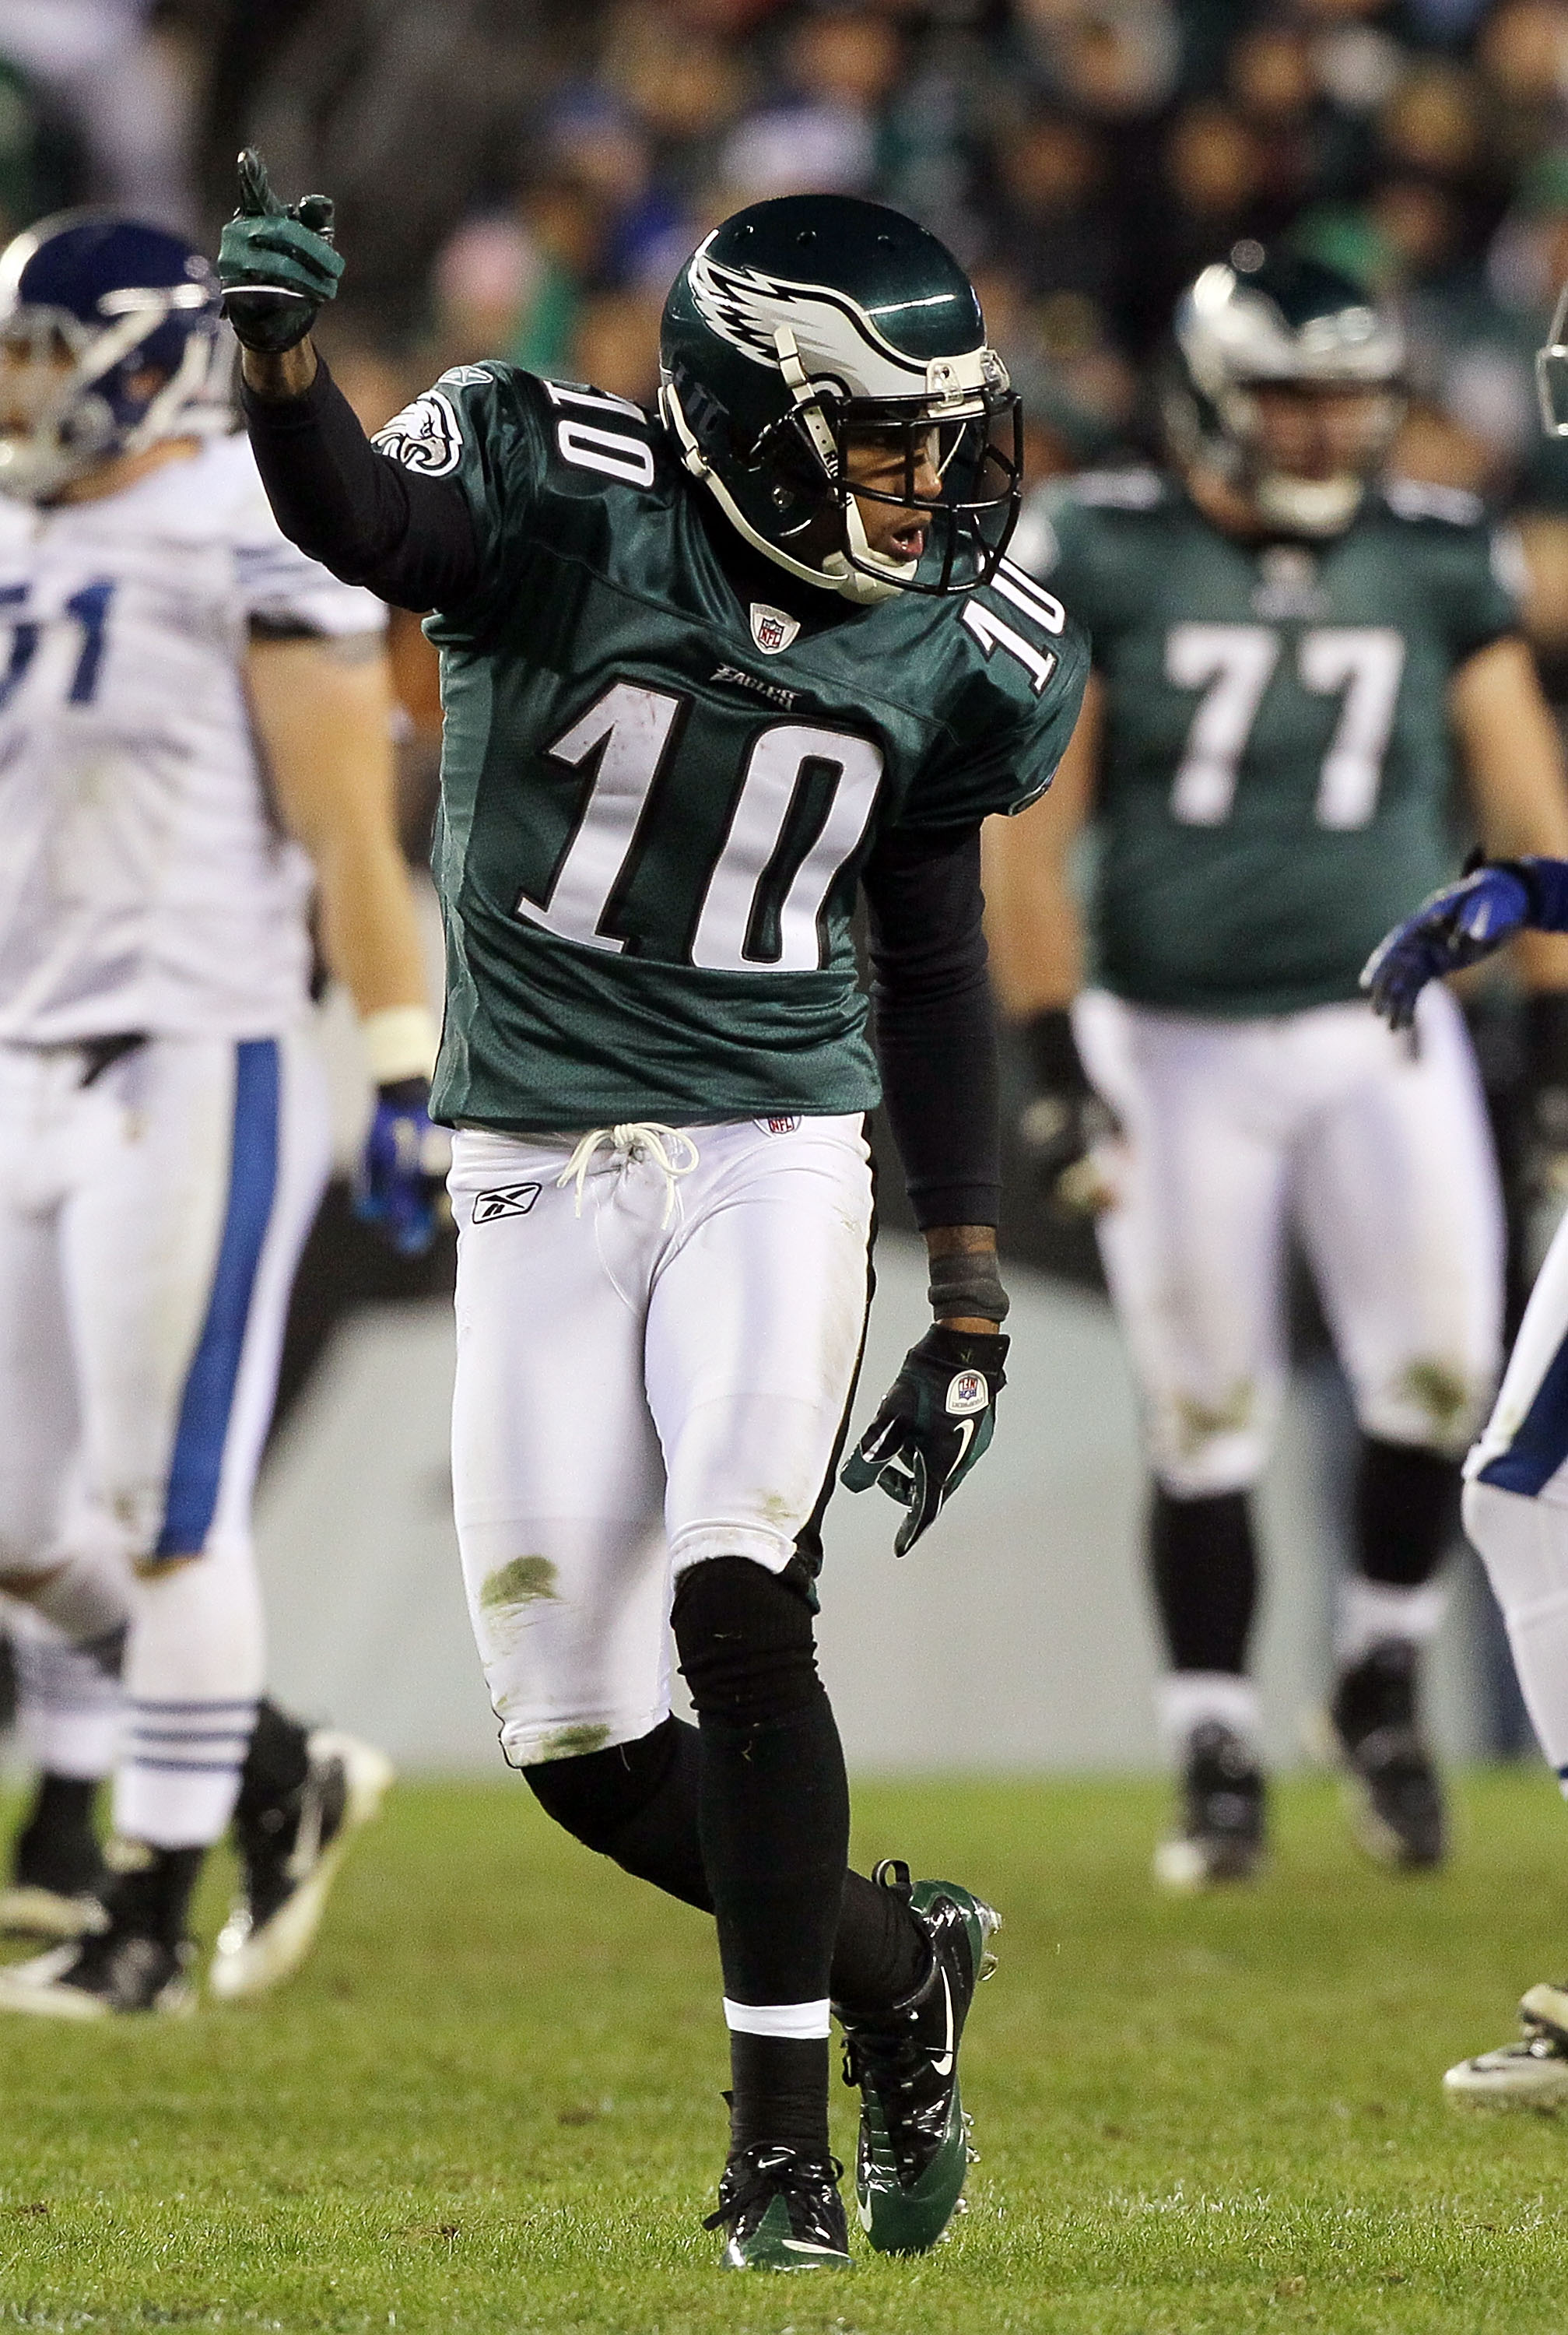 PHILADELPHIA - NOVEMBER 07:  DeSean Jackson #10 of the Philadelphia Eagles celebrates a first down against the Indianapolis Colts during the fourth quarter on November 7, 2010 at Lincoln Financial Field in Philadelphia, Pennsylvania. The Eagles defeated t